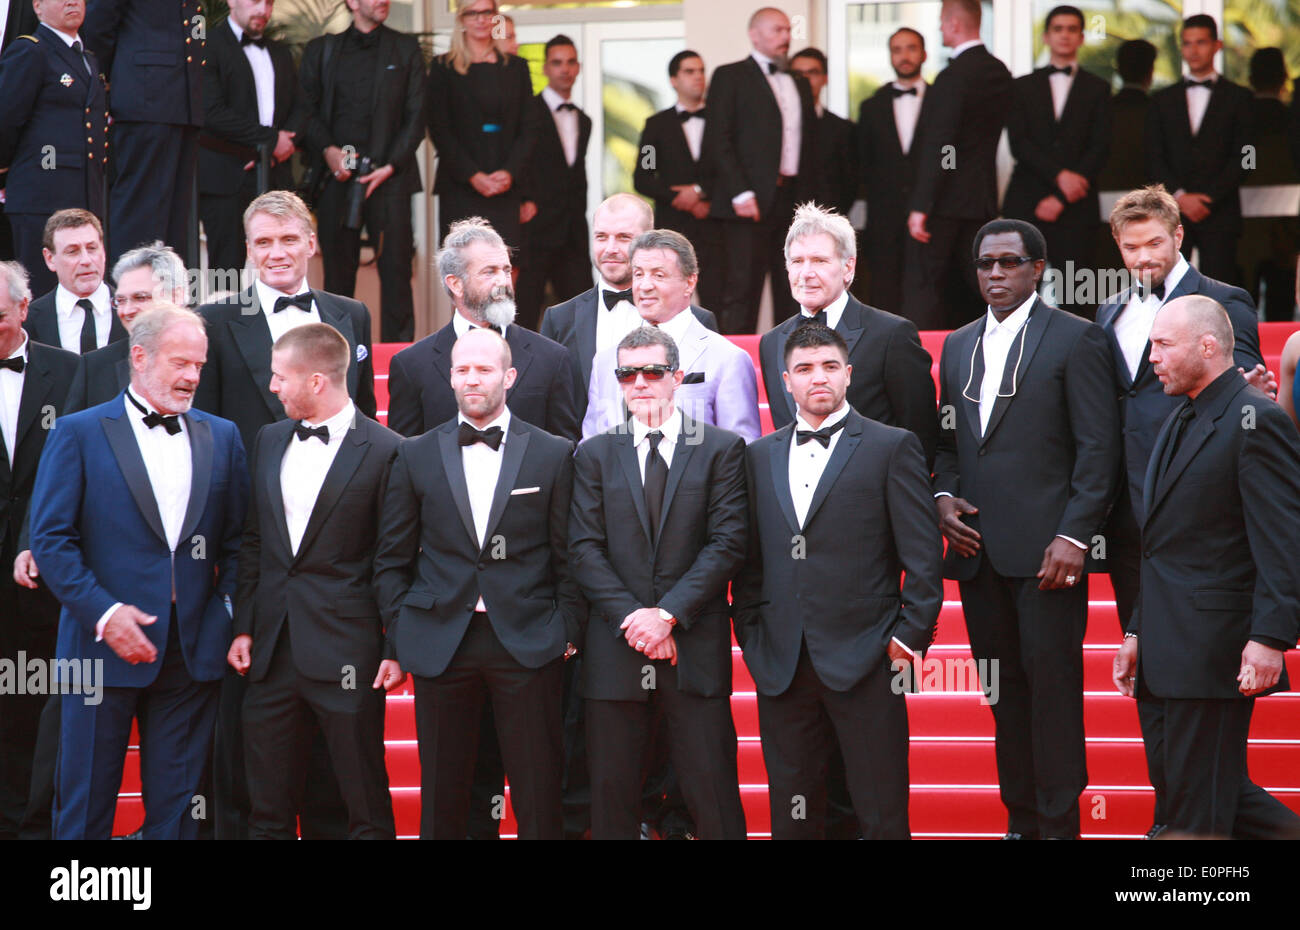 Cannes, France. 18th May, 2014. Dolph Lundgren, Harrison Ford, Patrick Hughes, Antonio Banderas, Mel Gibson, Jason Statham, Sylvester Stallone, Ronda Rousey, Wesley Snipes and Kellan Lutz at the The Expendables 3 red carpet at the 67th Cannes Film Festival France. Sunday 18th May 2014 in Cannes Film Festival, France. Credit:  Doreen Kennedy/Alamy Live News Stock Photo